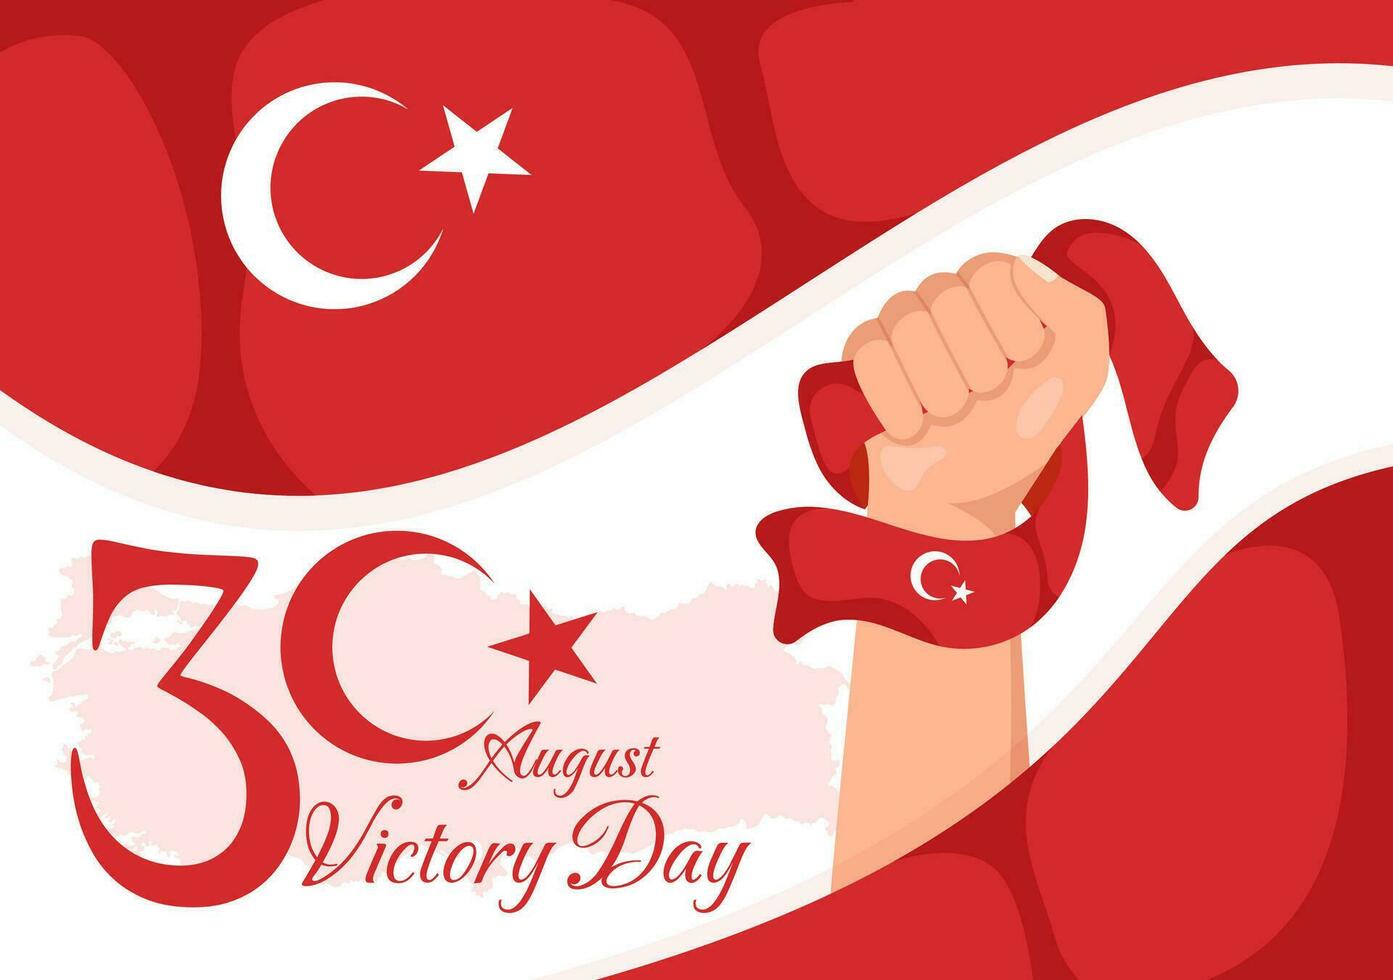 Turkey Victory Day Vector Illustration on 30 august with Zafer Bayrami Celebration in Flat Cartoon Hand Drawn Background Templates